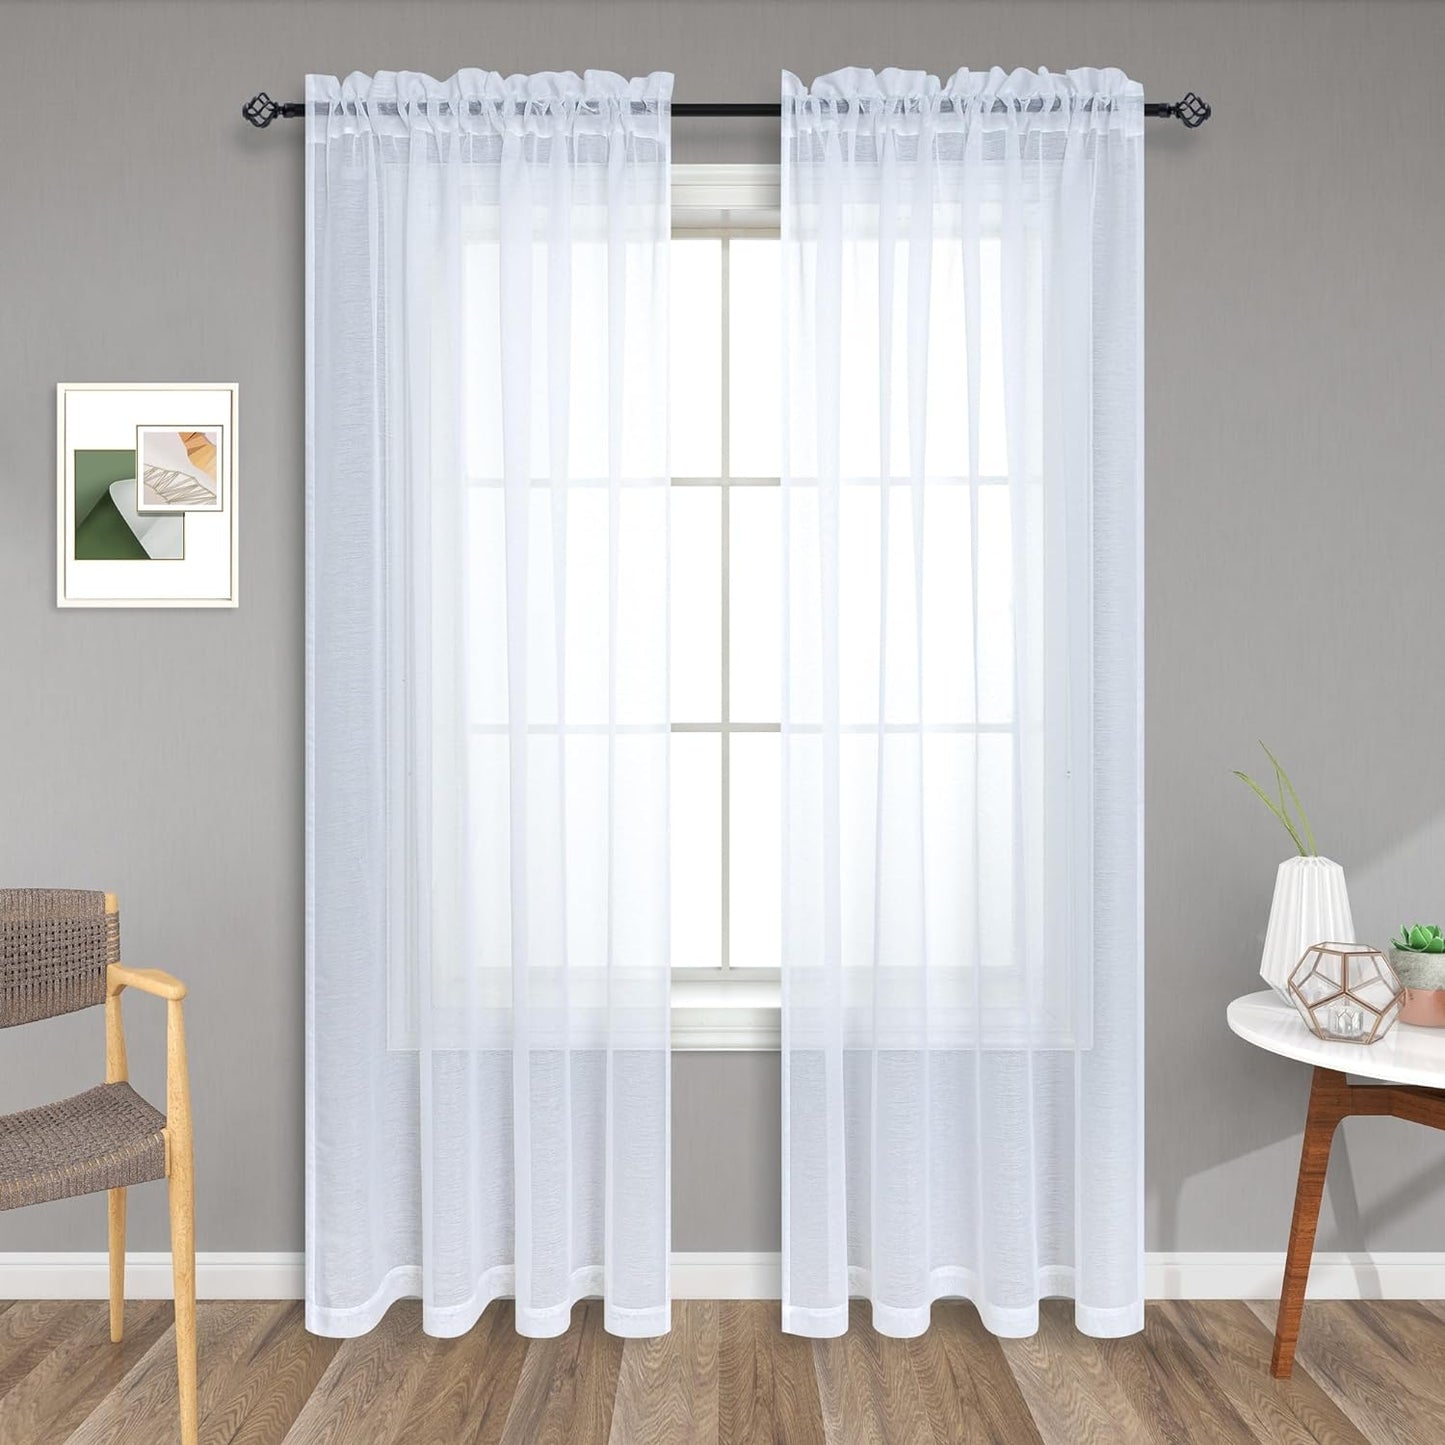 Terracotta Curtains 84 Inch Length for Living Room 2 Panel Sets Rod Pocket Sheer Curtains for Living Room Rust Burnt Orange Red  PITALK TEXTILE White 52X102 